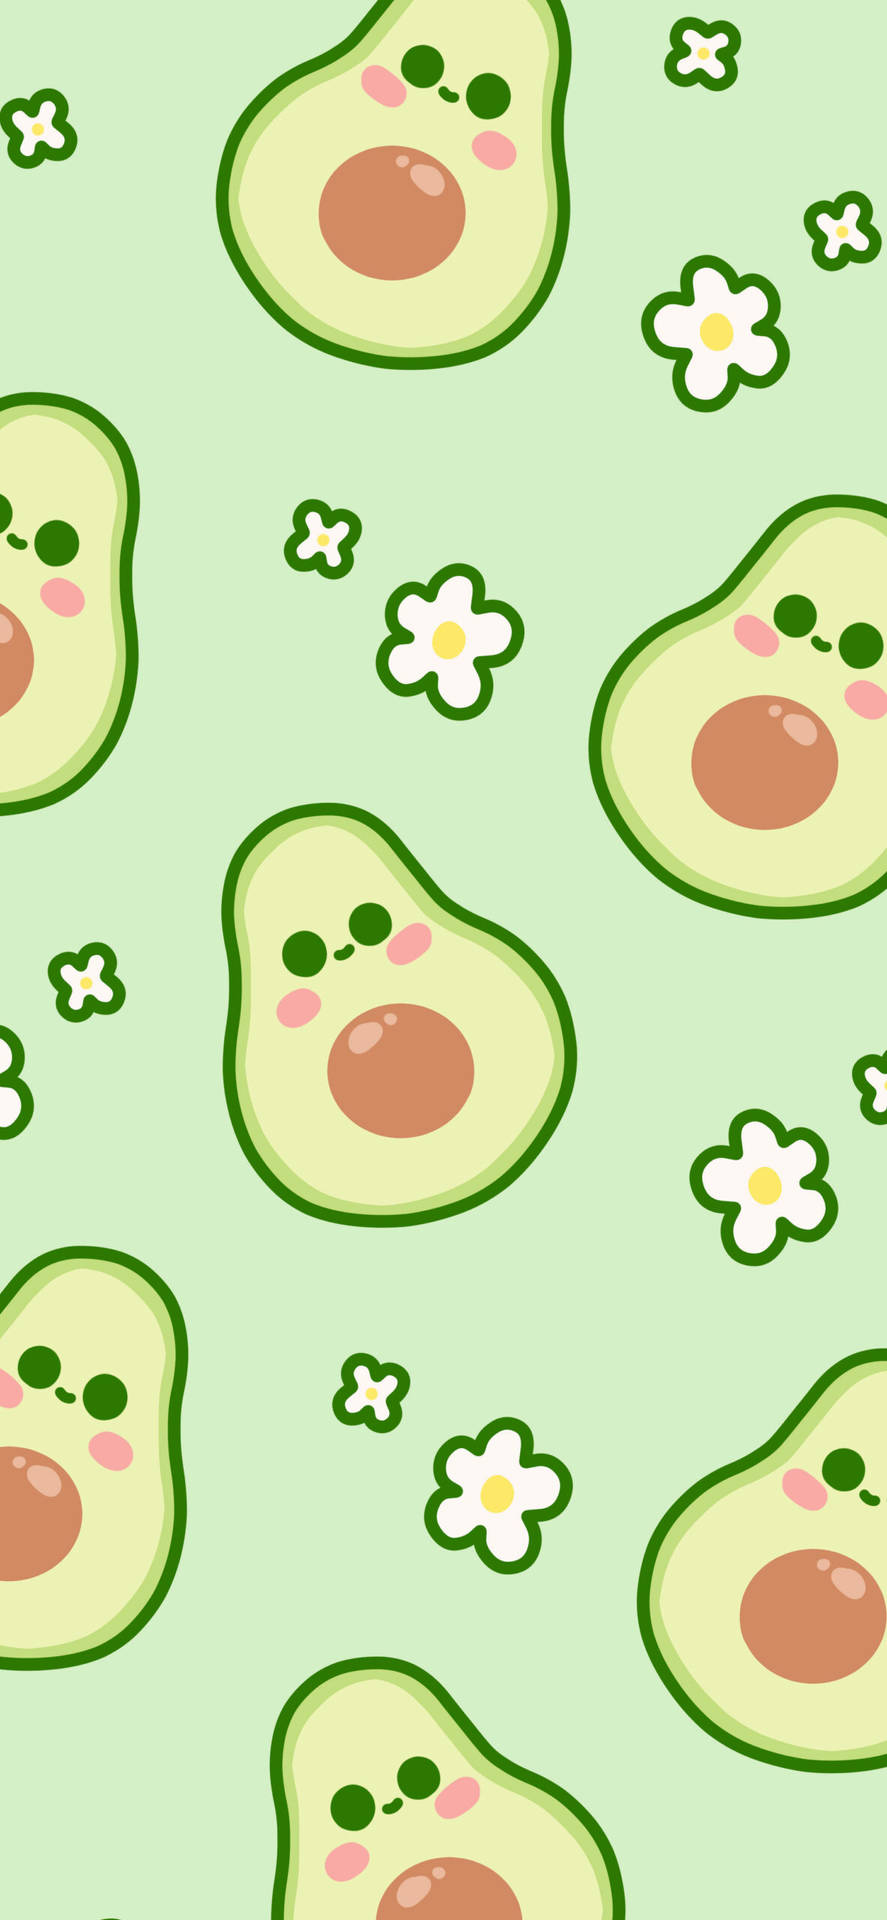 Cute Avocado With Flowers Background